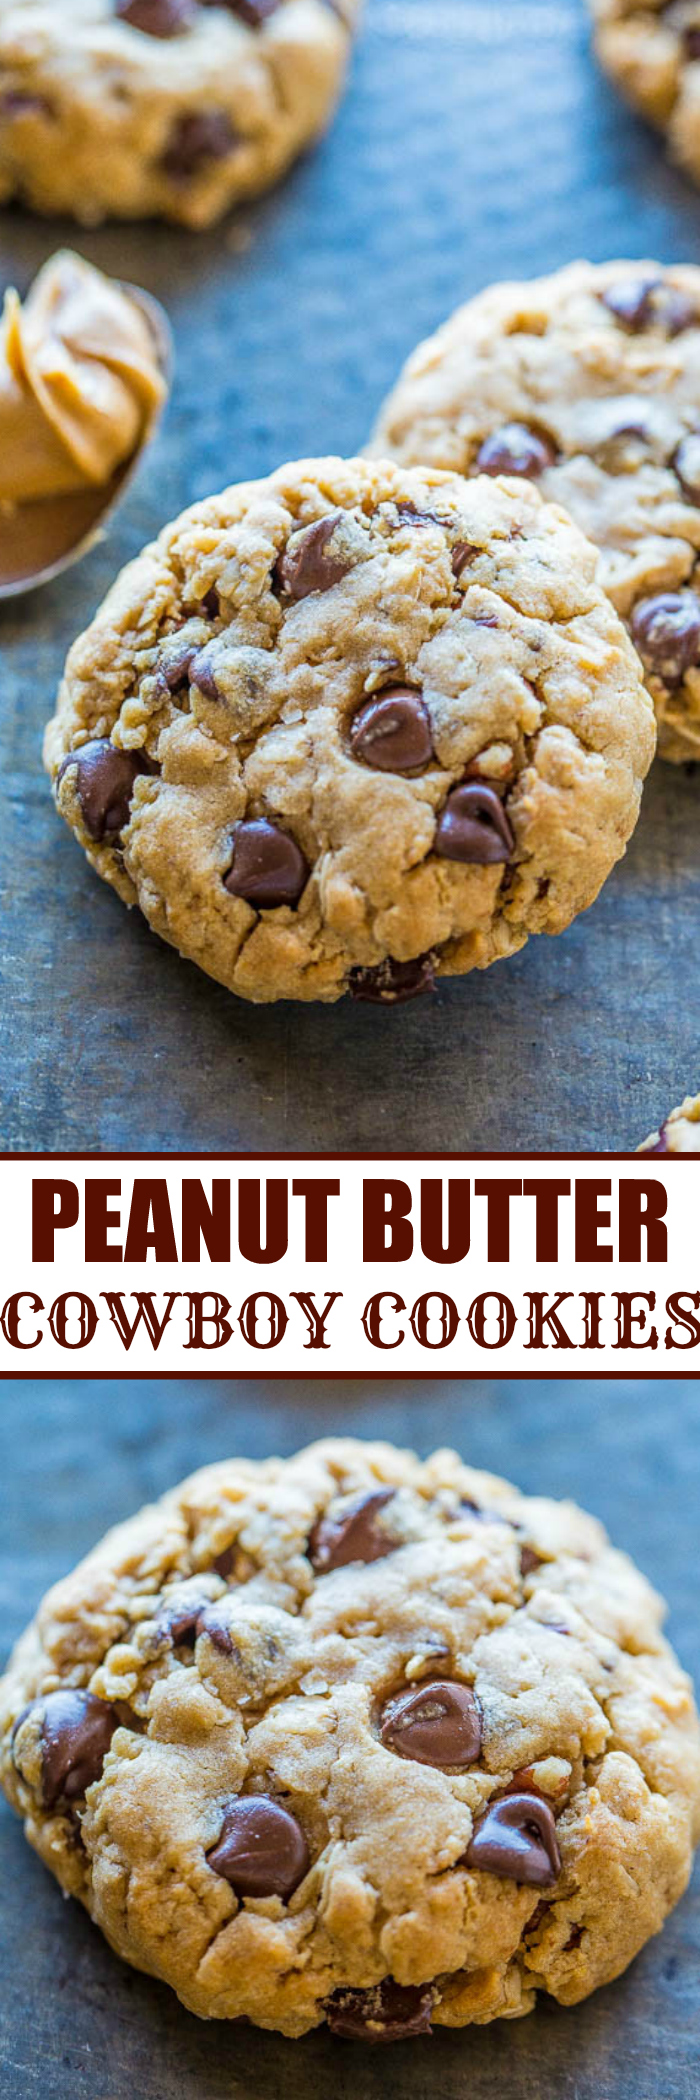 Peanut Butter Cowboy Cookies - Chewy oats, sweet coconut, crunchy pecans, peanut butter, and plenty of chocolate!! A true 'kitchen sink' cookie that stays soft and chewy! Everyone (not just cowboys) loves these cookies!!